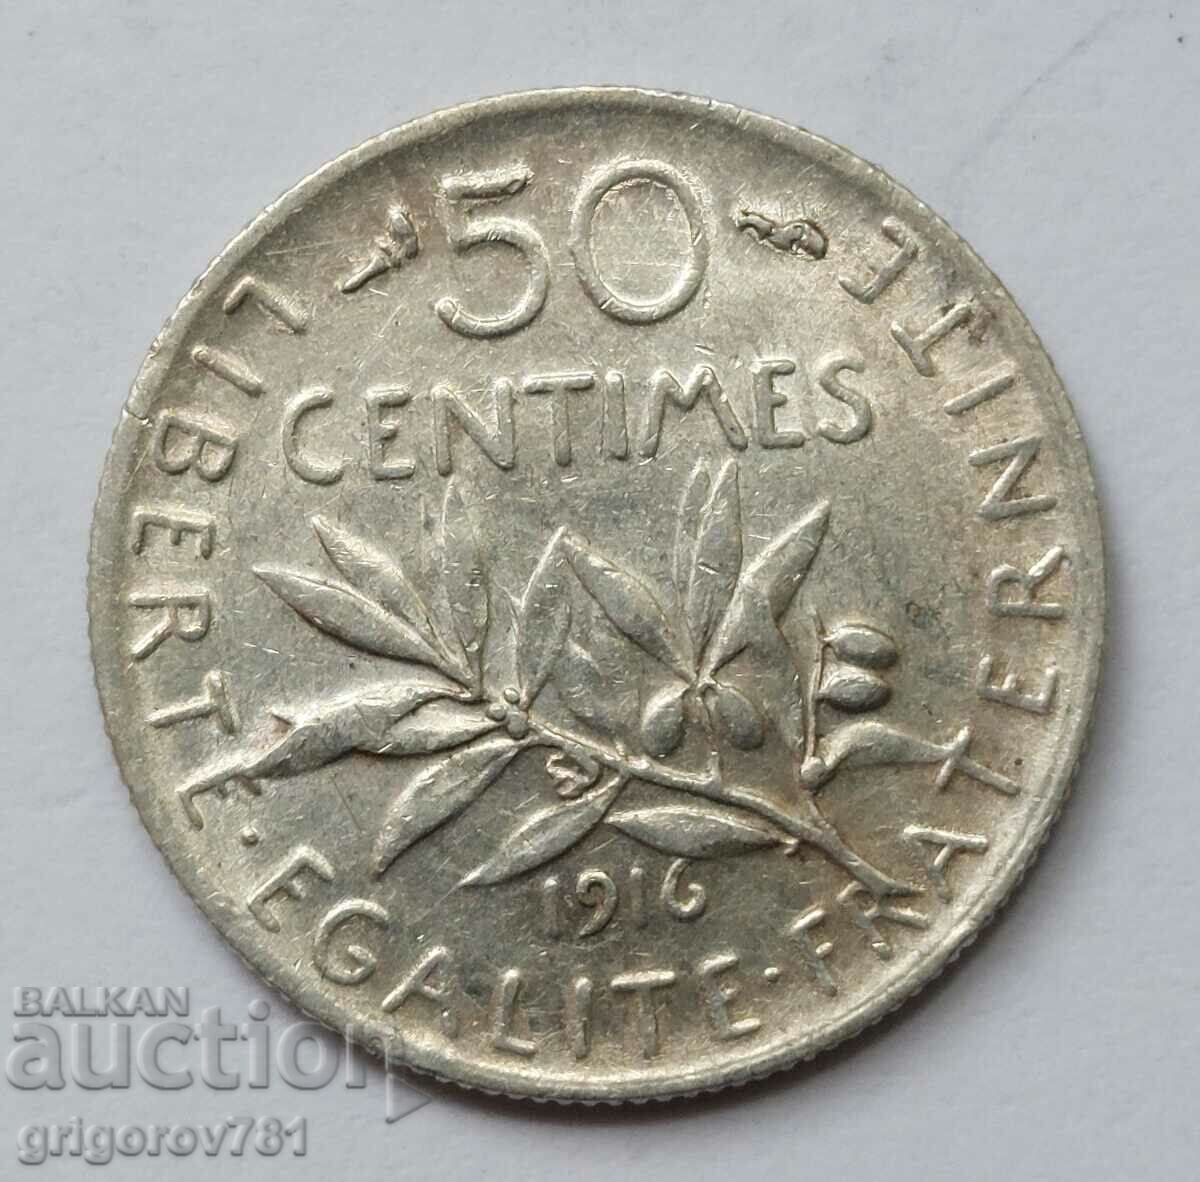 50 centimes silver France 1916 - silver coin #70